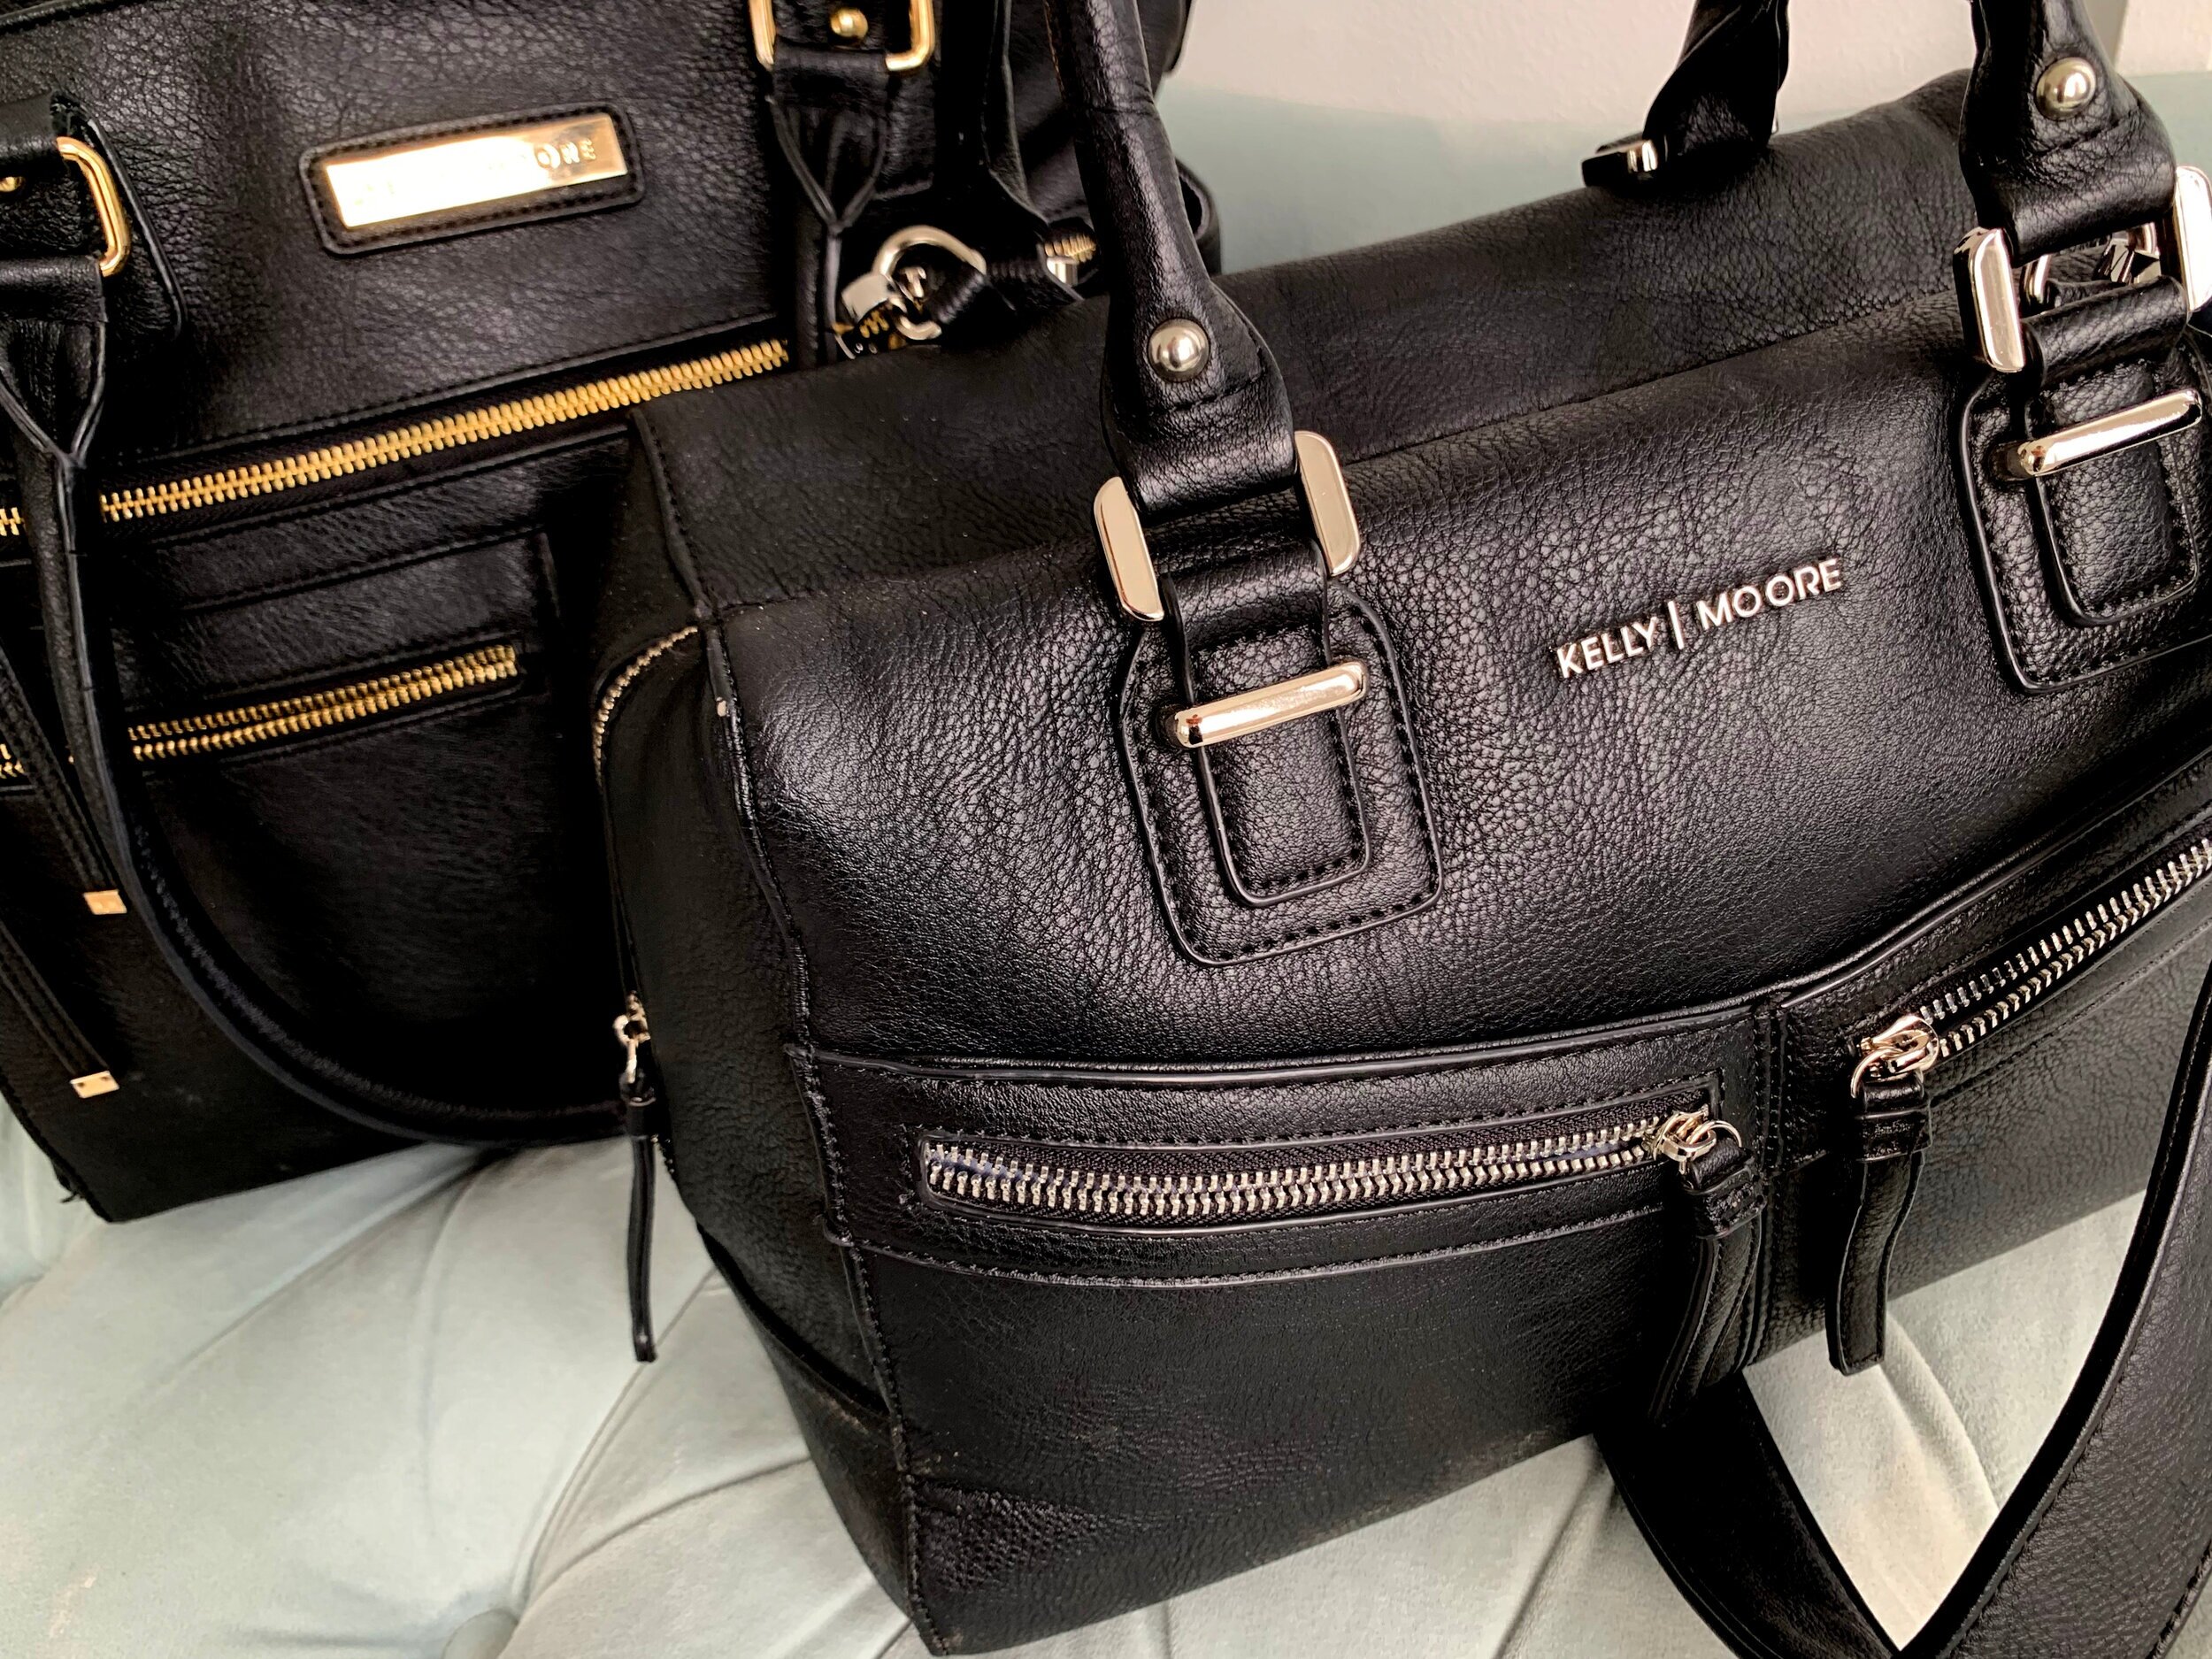 Why I'm Not Buying the It Bag Trend